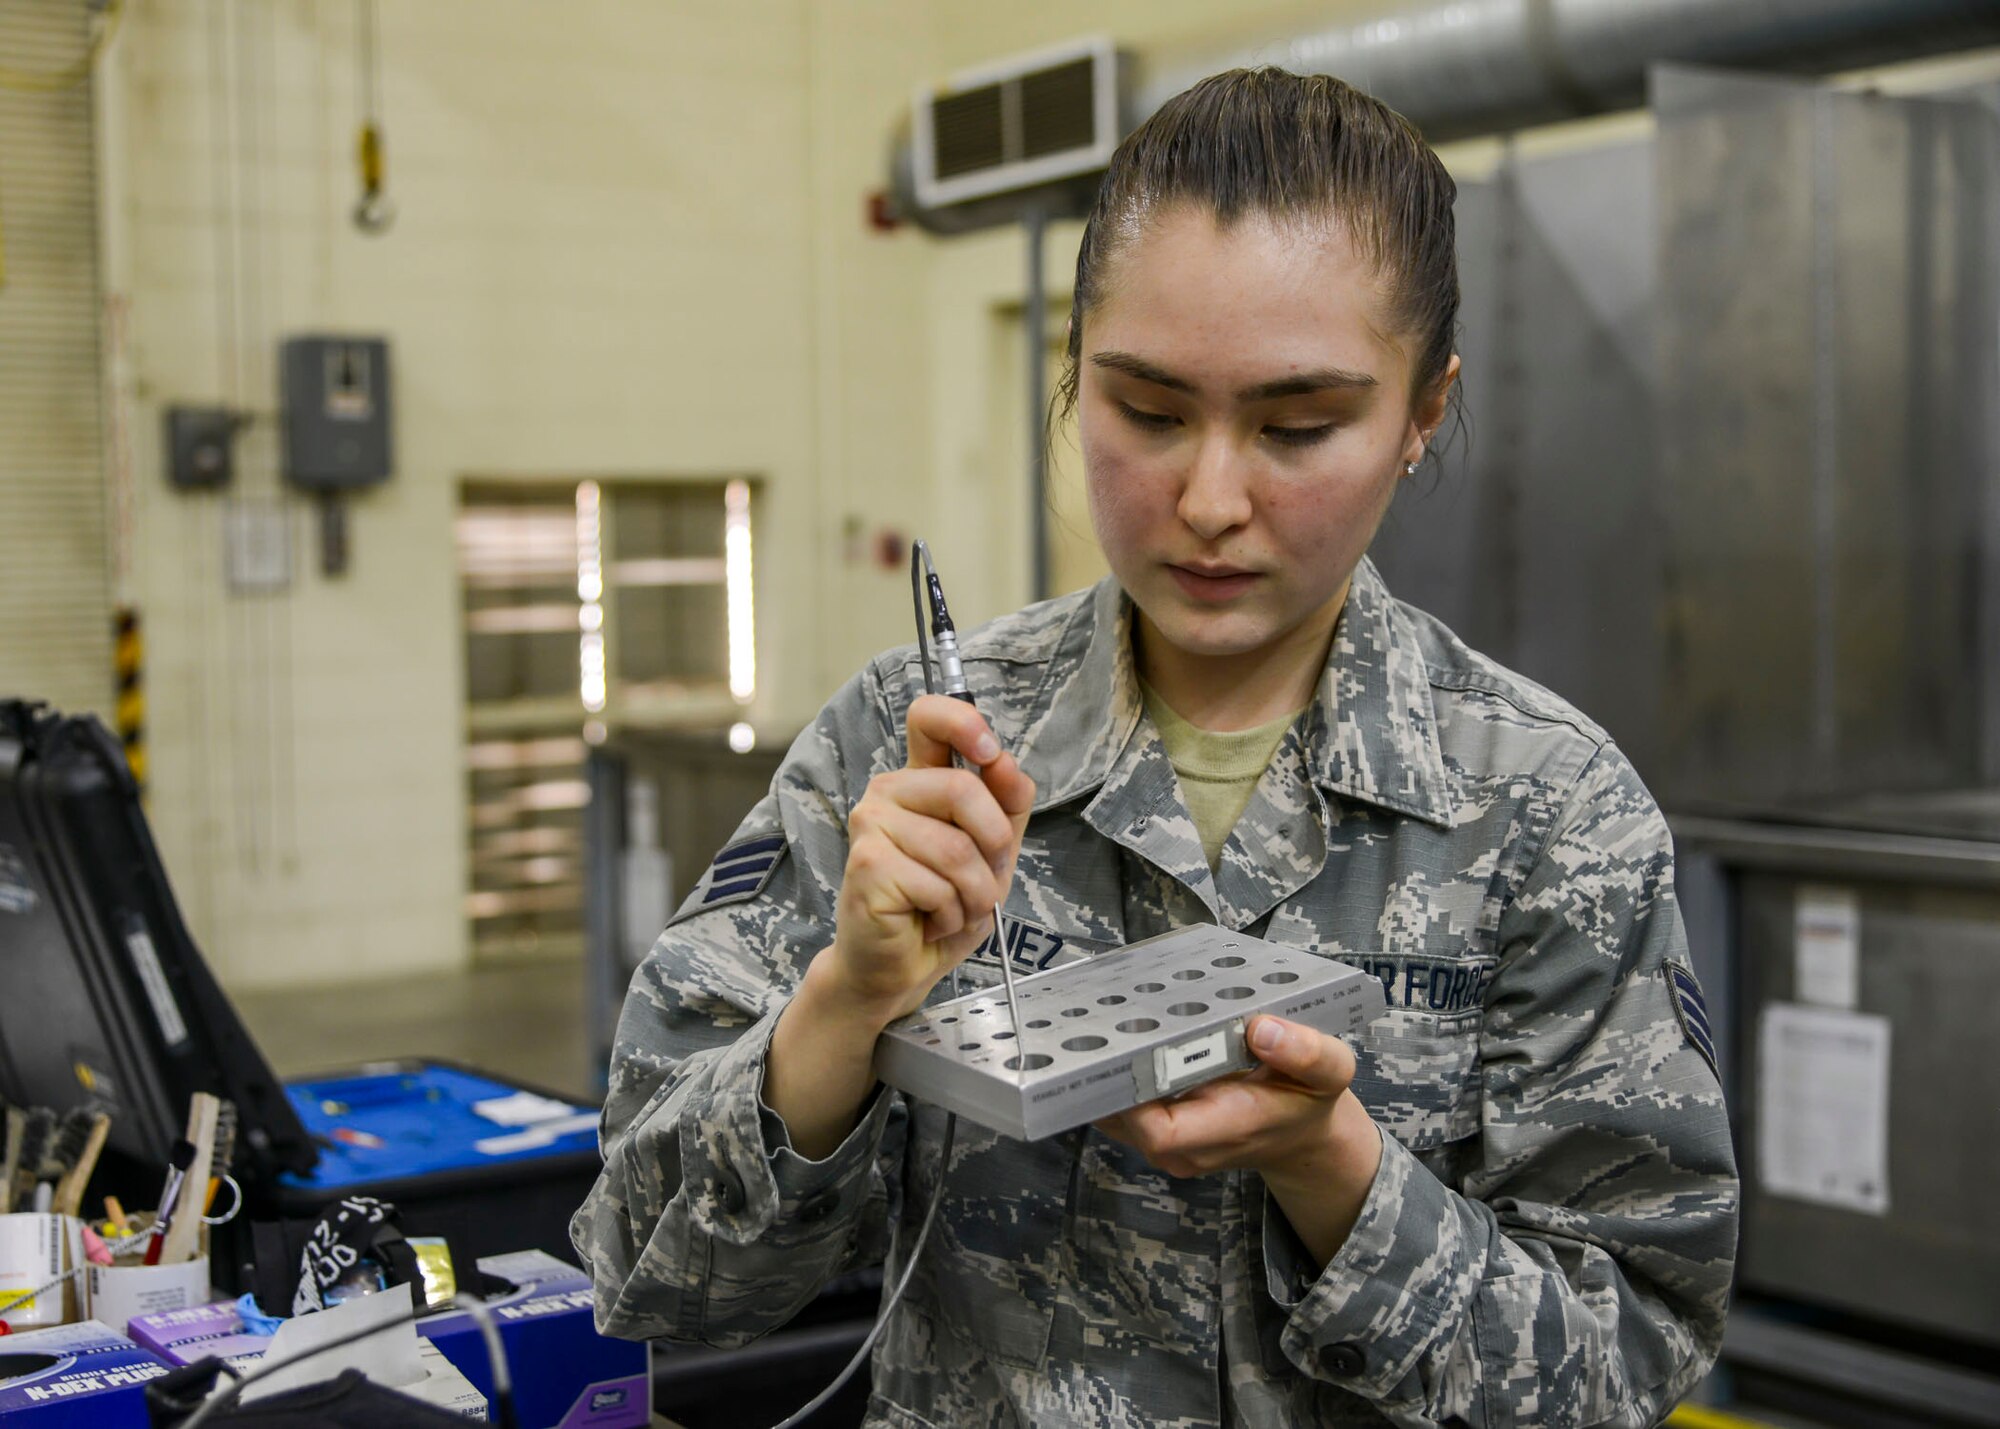 Senior Airman Aliyah Vasquez, 412th MXS, Non-Destructive Inspection Section, demonstrates a scanning tool used to identify cracks in air plane parts. (U.S. Air Force photo by Giancarlo Casem)